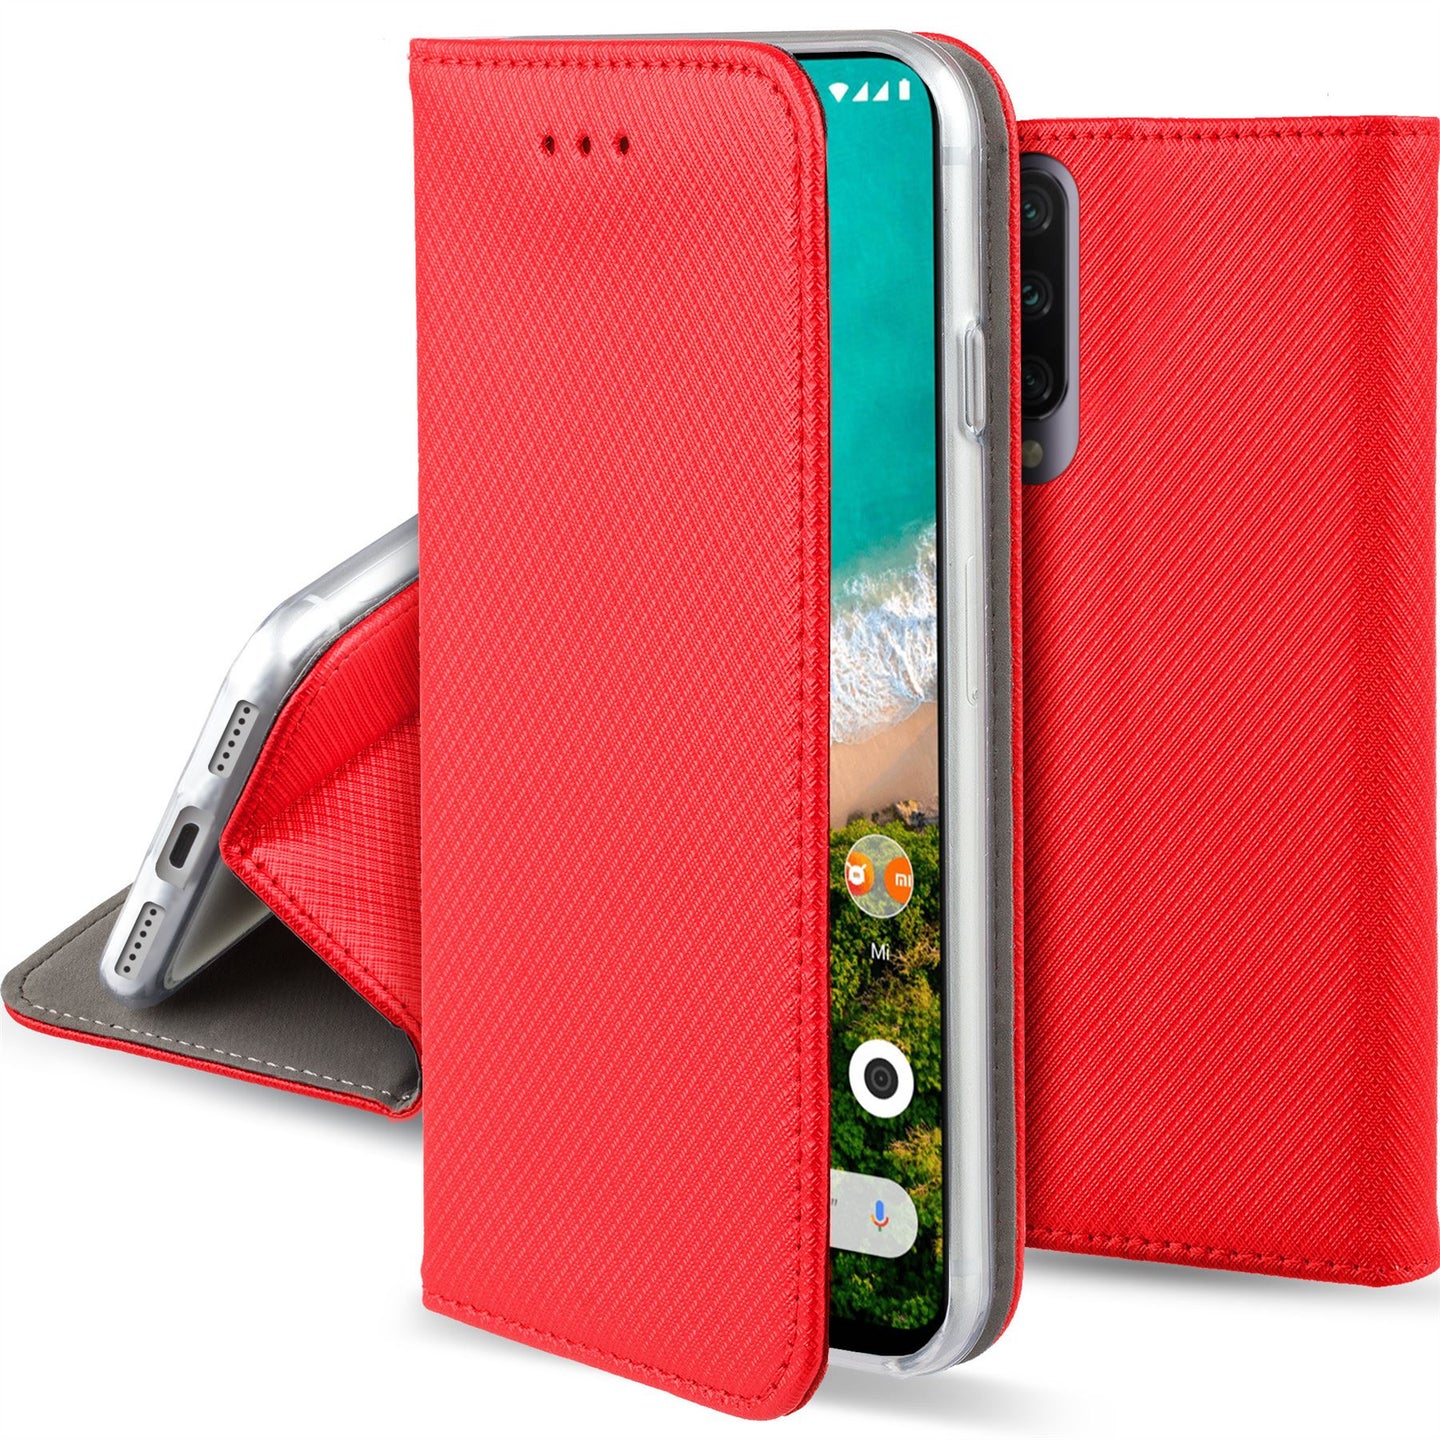 Moozy Case Flip Cover for Xiaomi Mi A3, Red - Smart Magnetic Flip Case with Card Holder and Stand